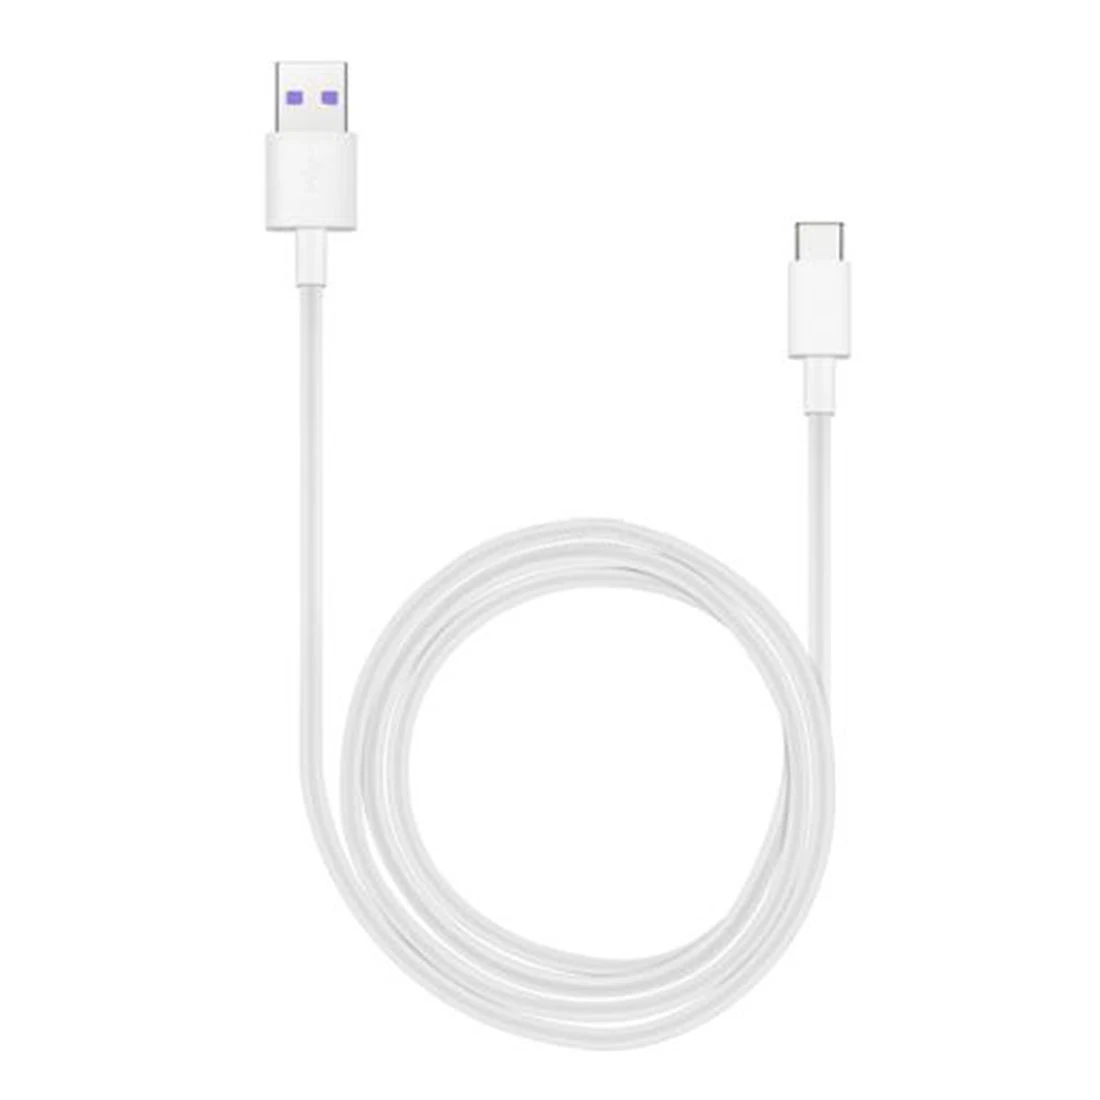 

Cablecc 5A USB Type C Cable For Huawei P20 Lite Honor 10 Pro 3.1 Fast Charging Data Cord Phone Charger Huawei Mate 9 & P10 100cm